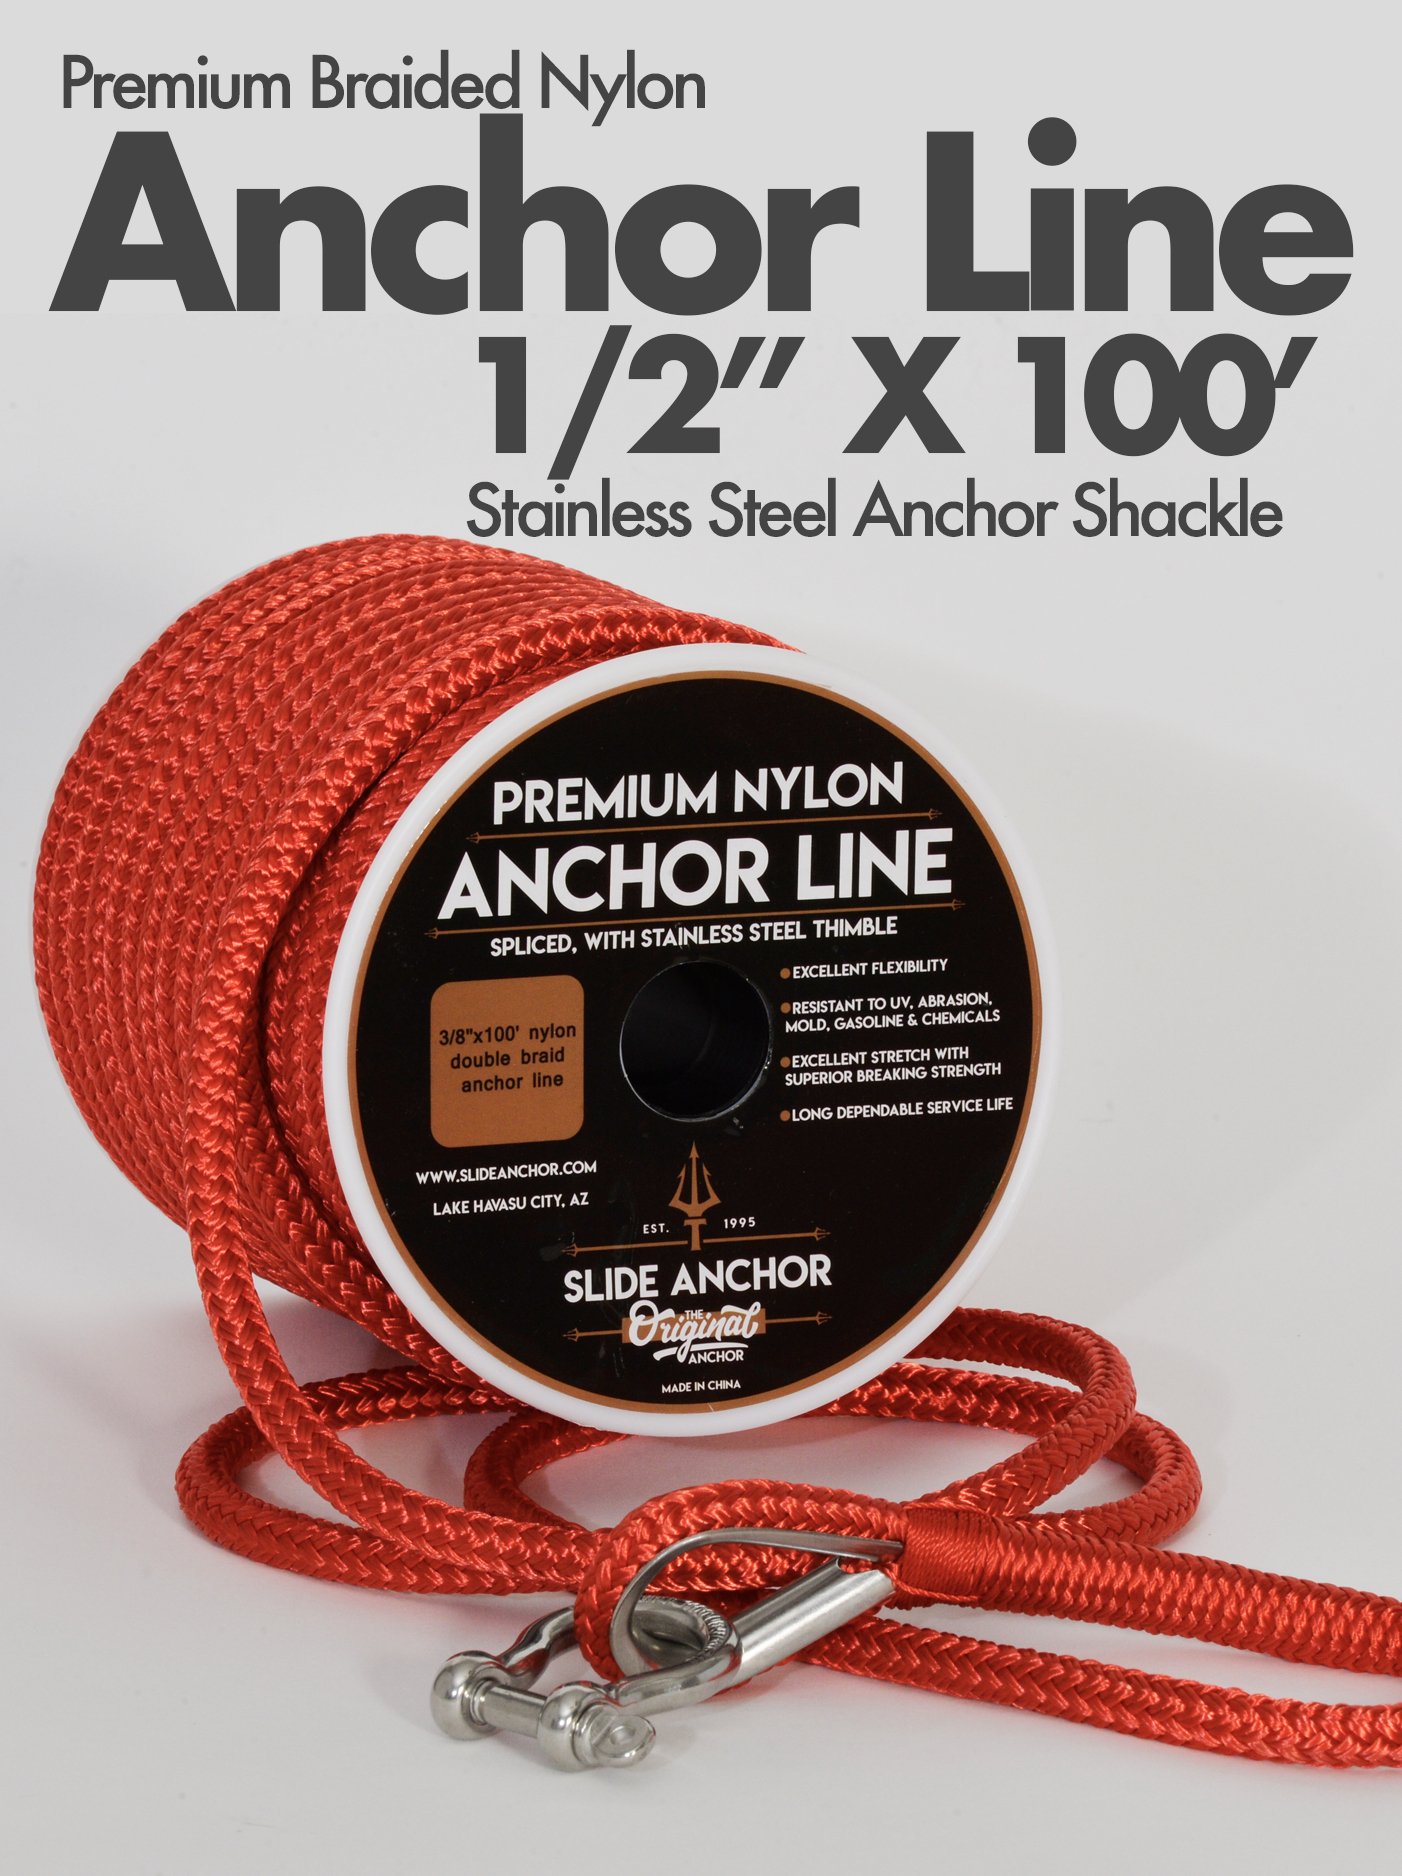 1/2 Premium Braided Nylon Anchor Line - 100 ft. (Includes Stainless  Shackle) — Slide Anchor